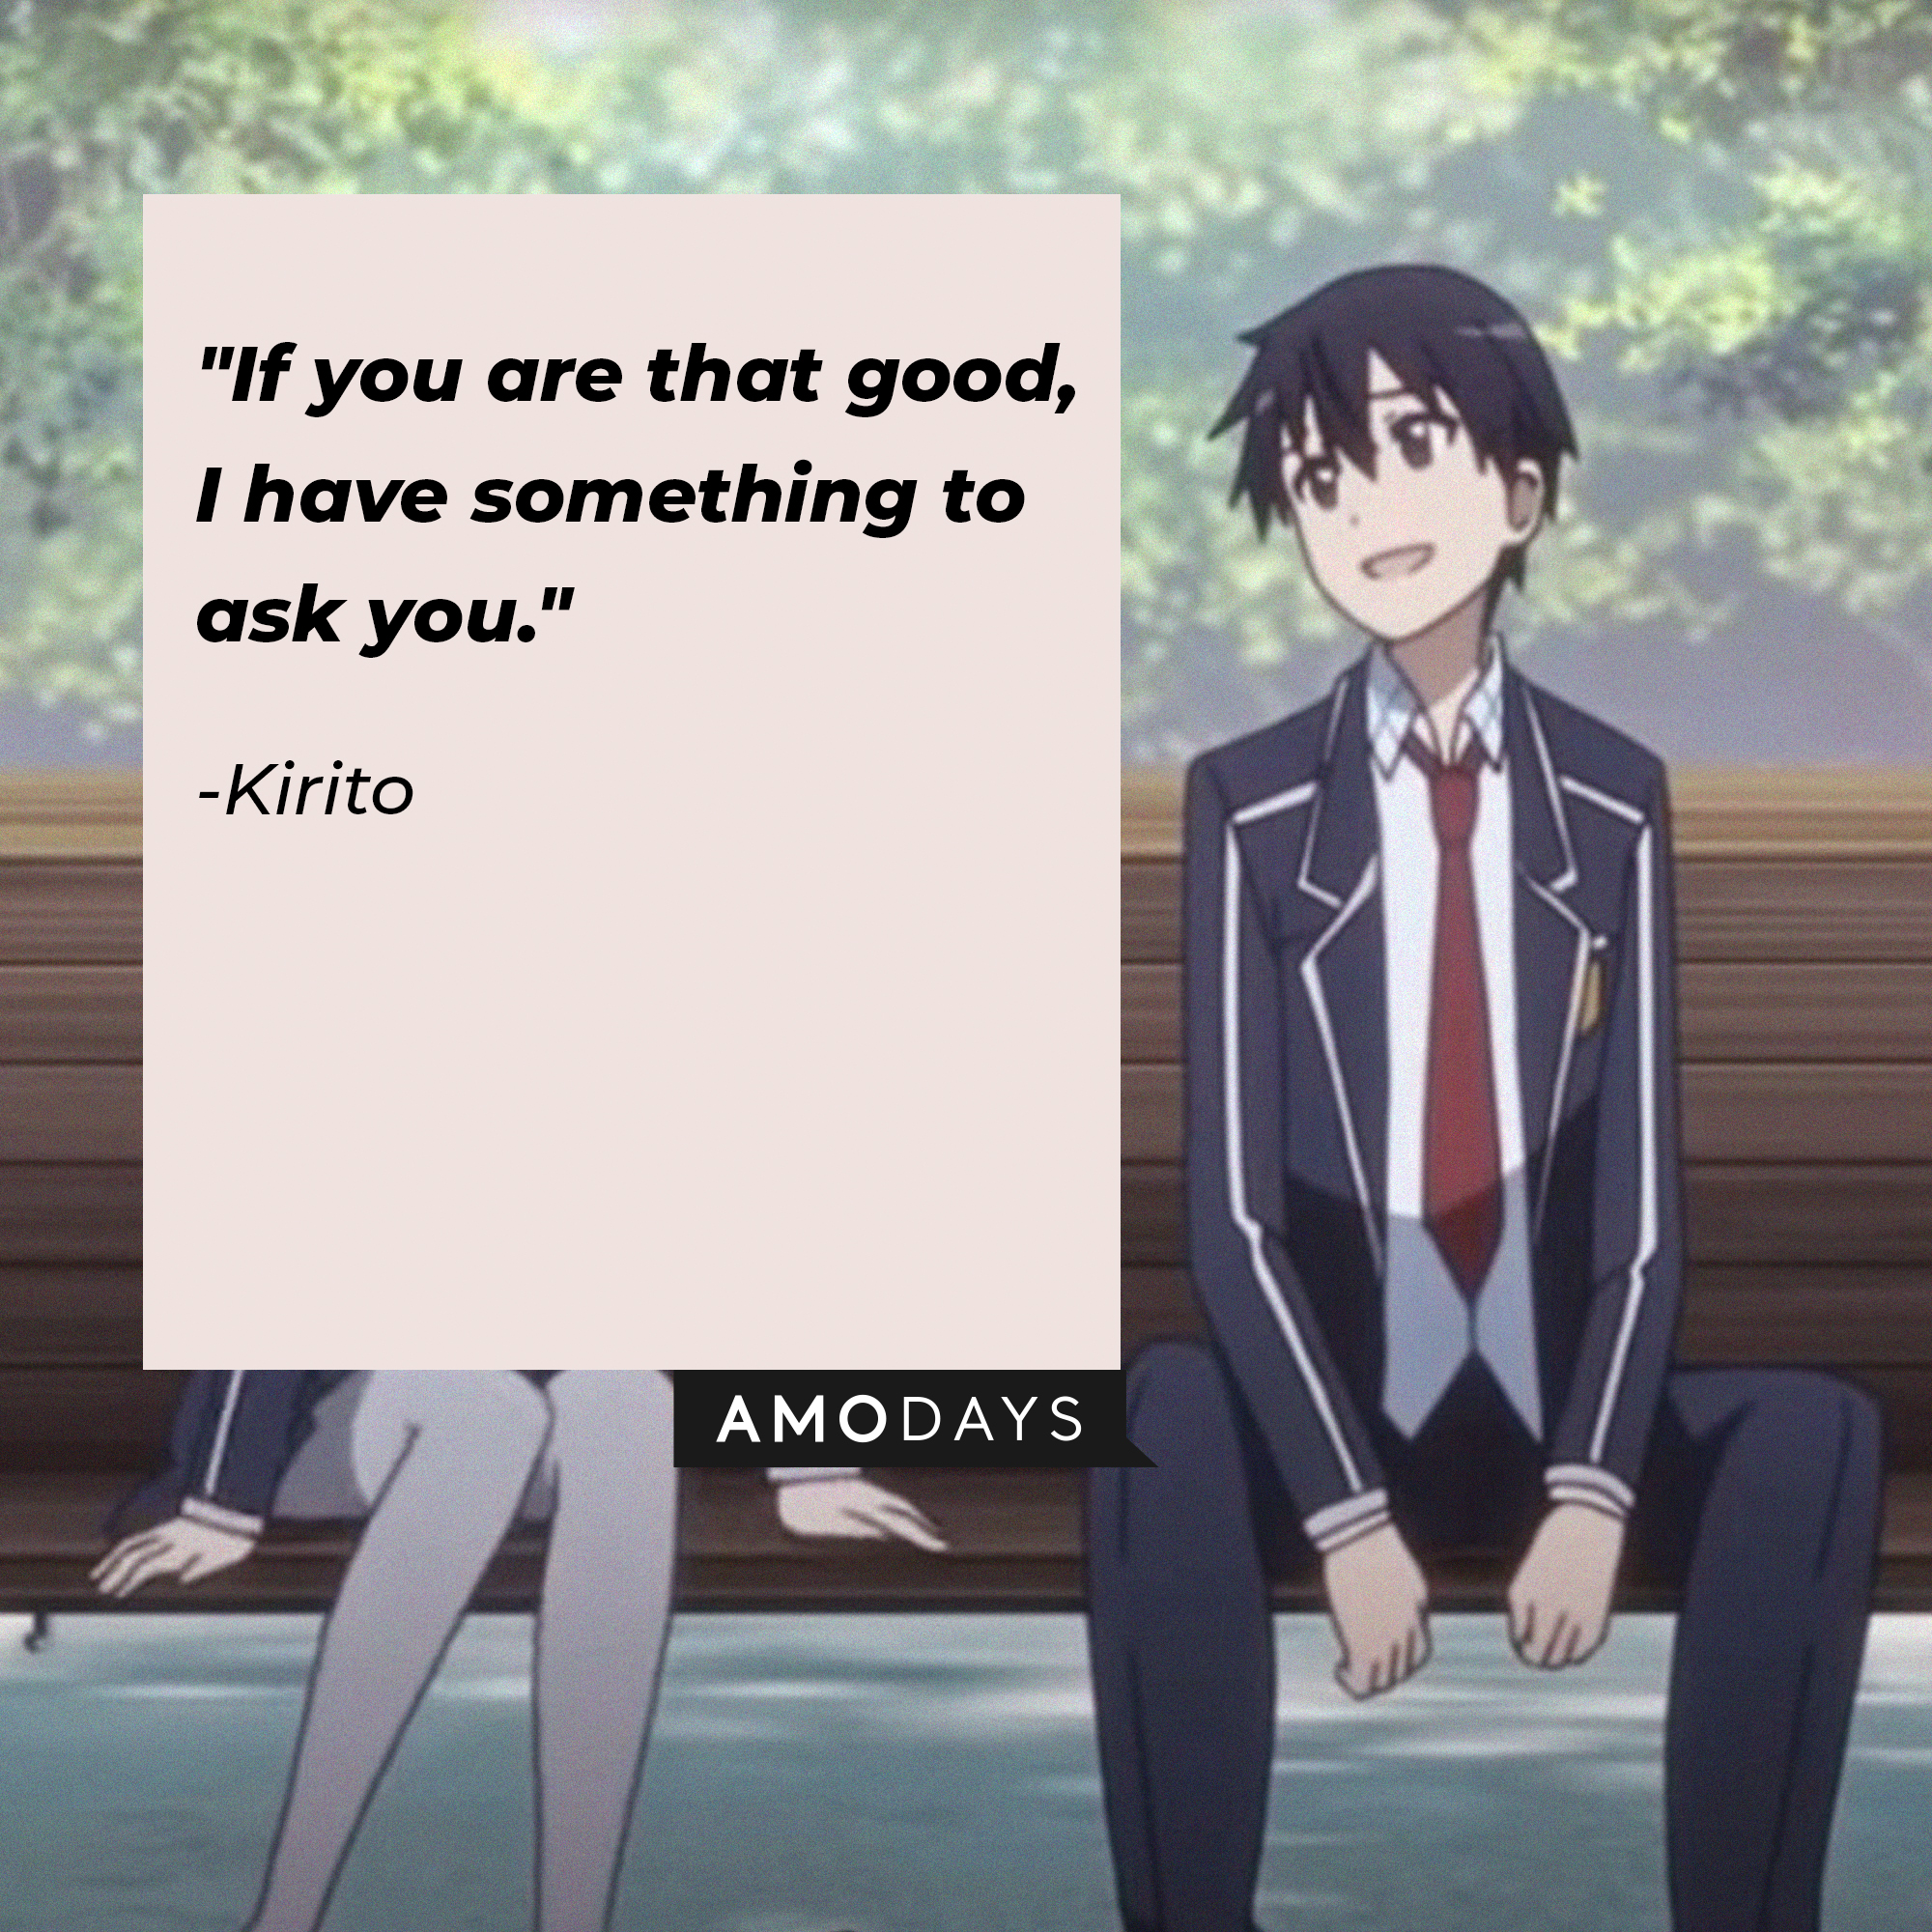 Kirito's quote: "If you are that good, I have something to ask you." | Source: Facebook.com/SwordArtOnlineUSA